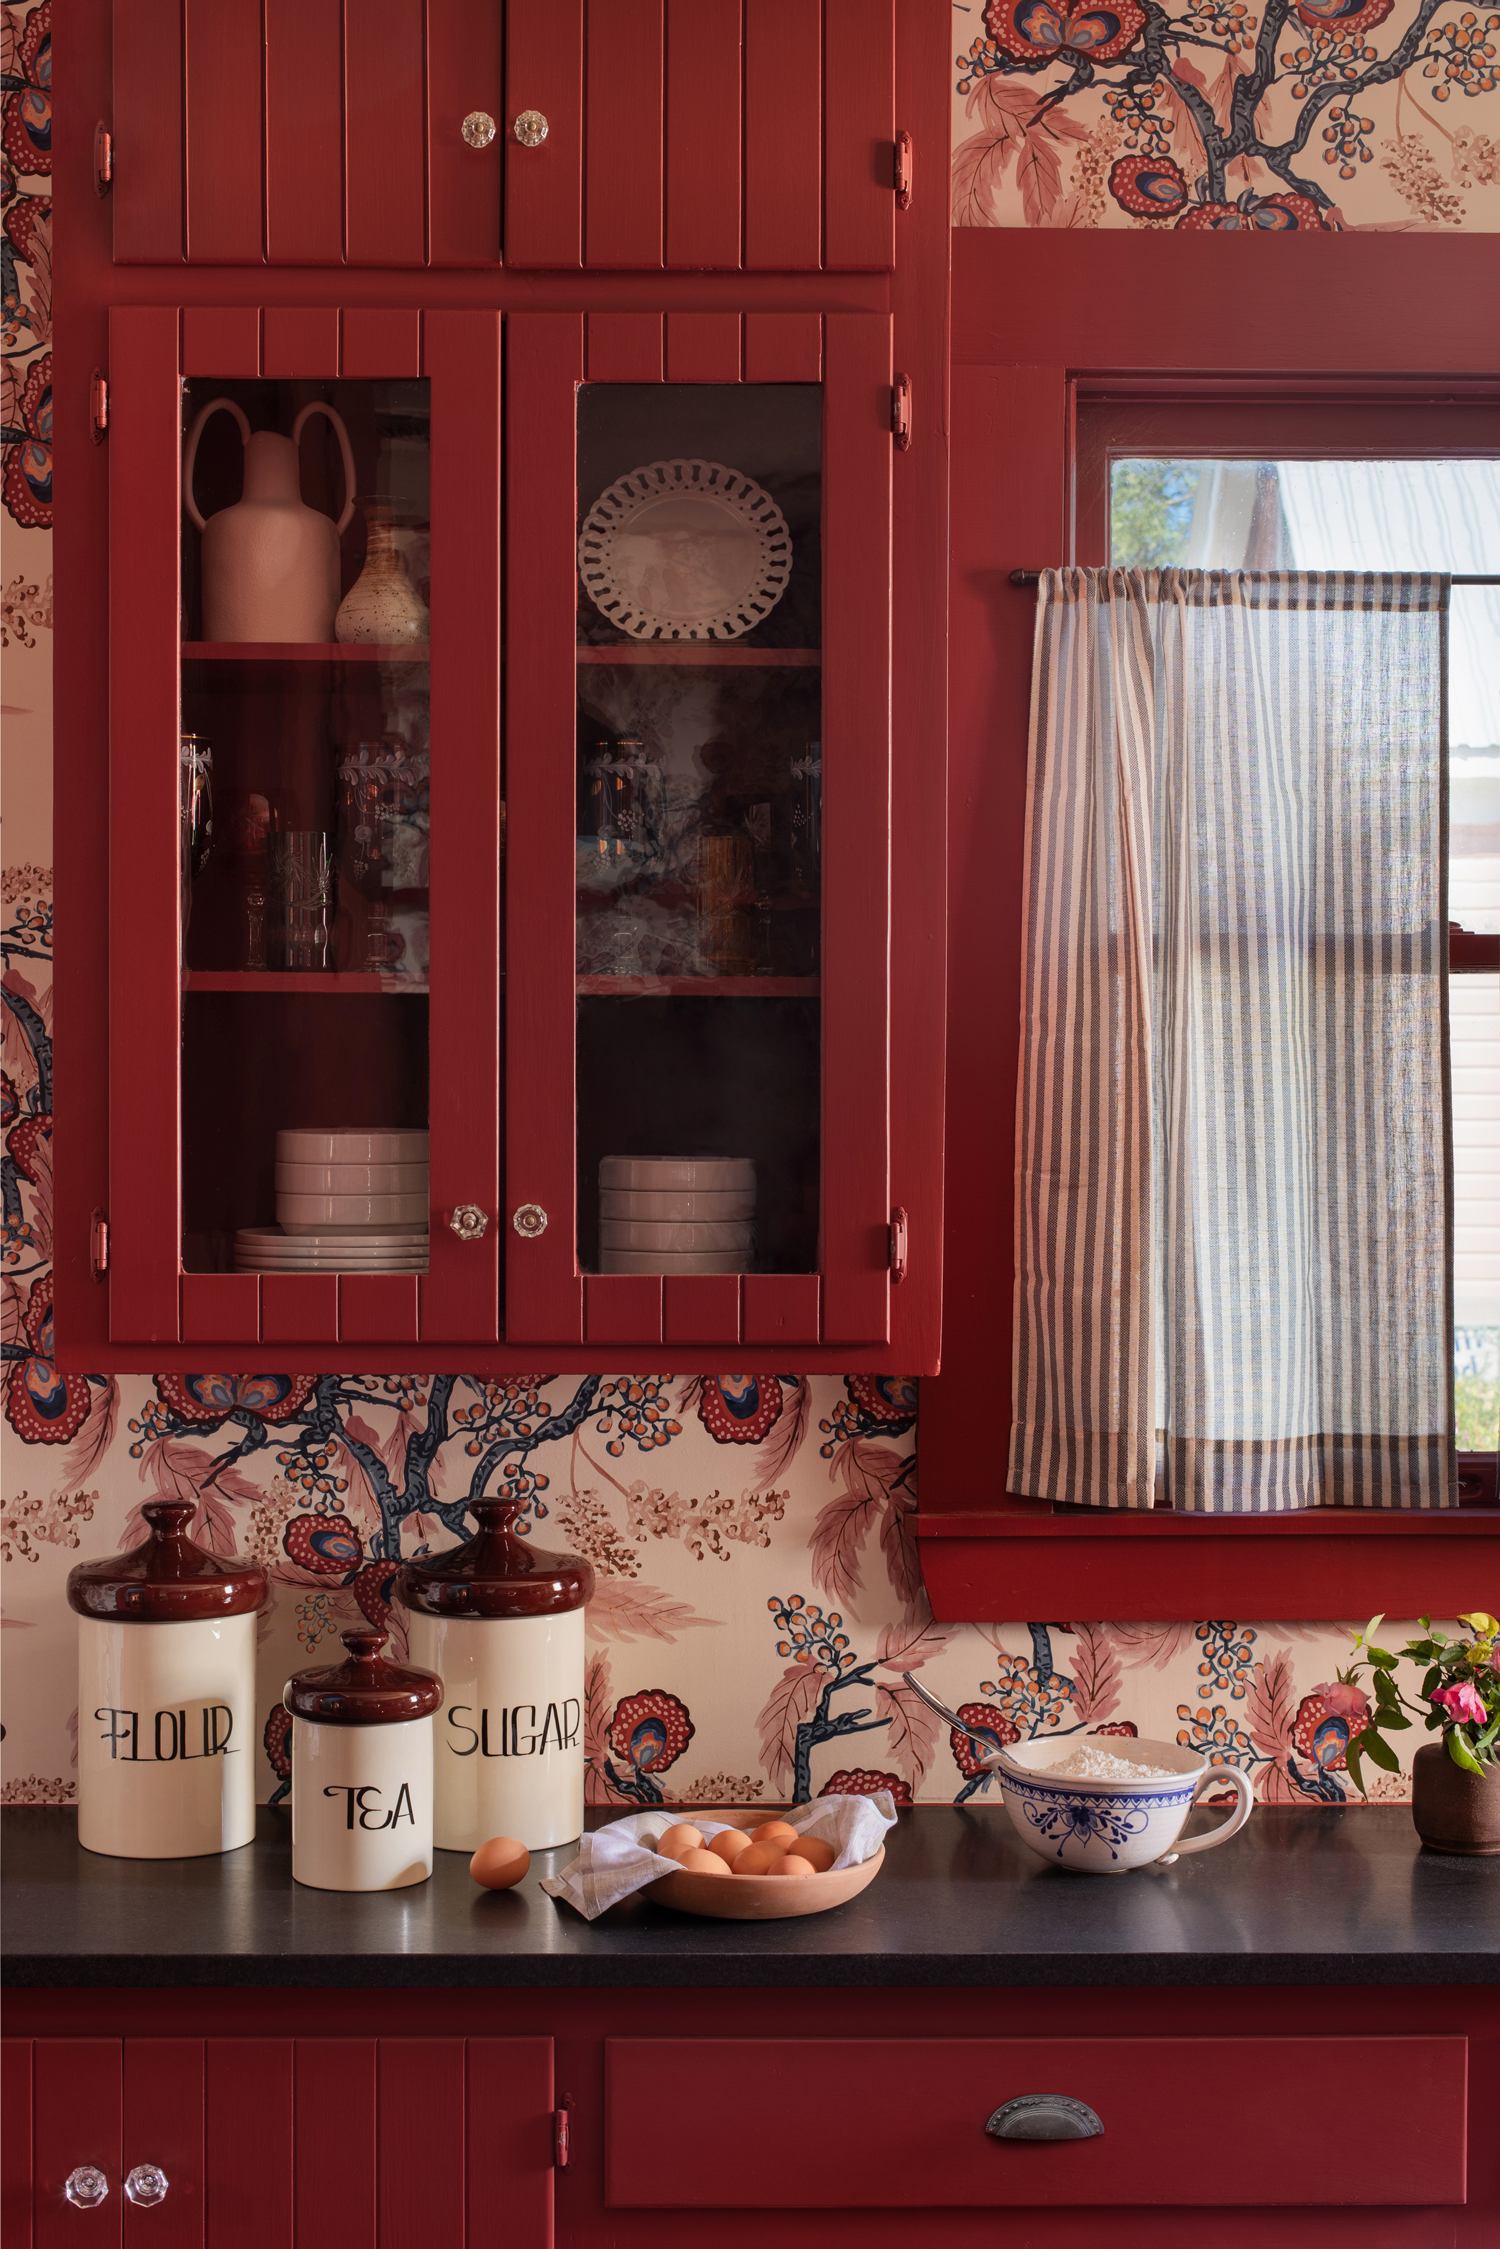 kitchen with crimson red cabinets and patterned wallpaper